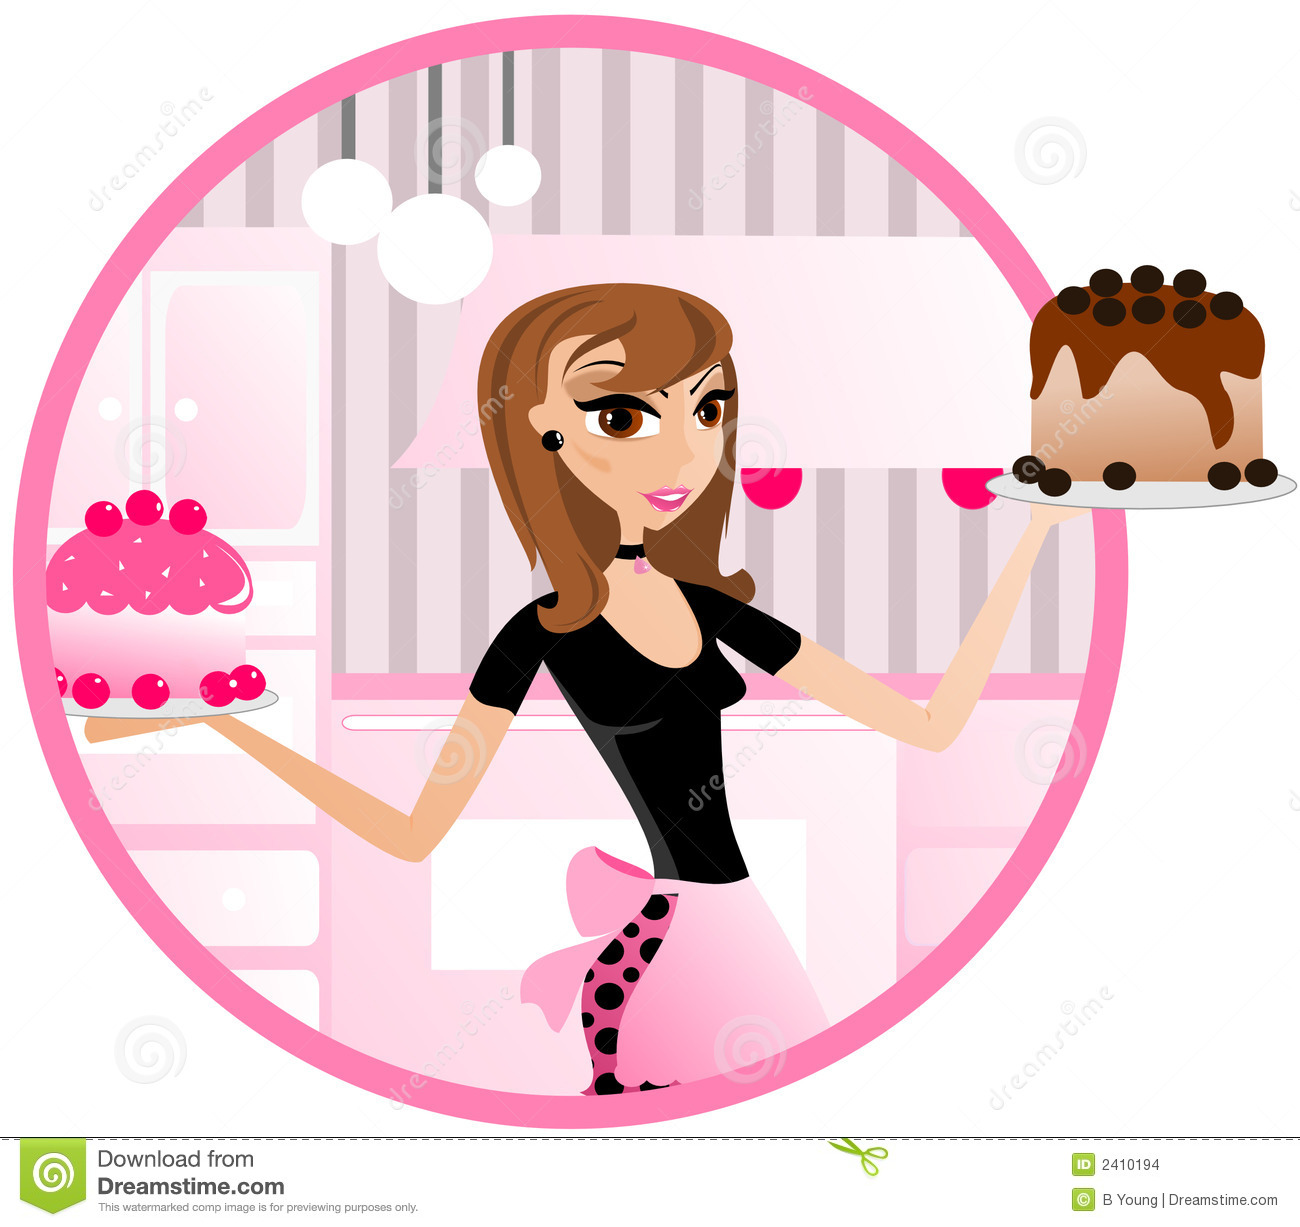 Illustration Presentation Of A Retro Brown Hair Woman In A Bakery